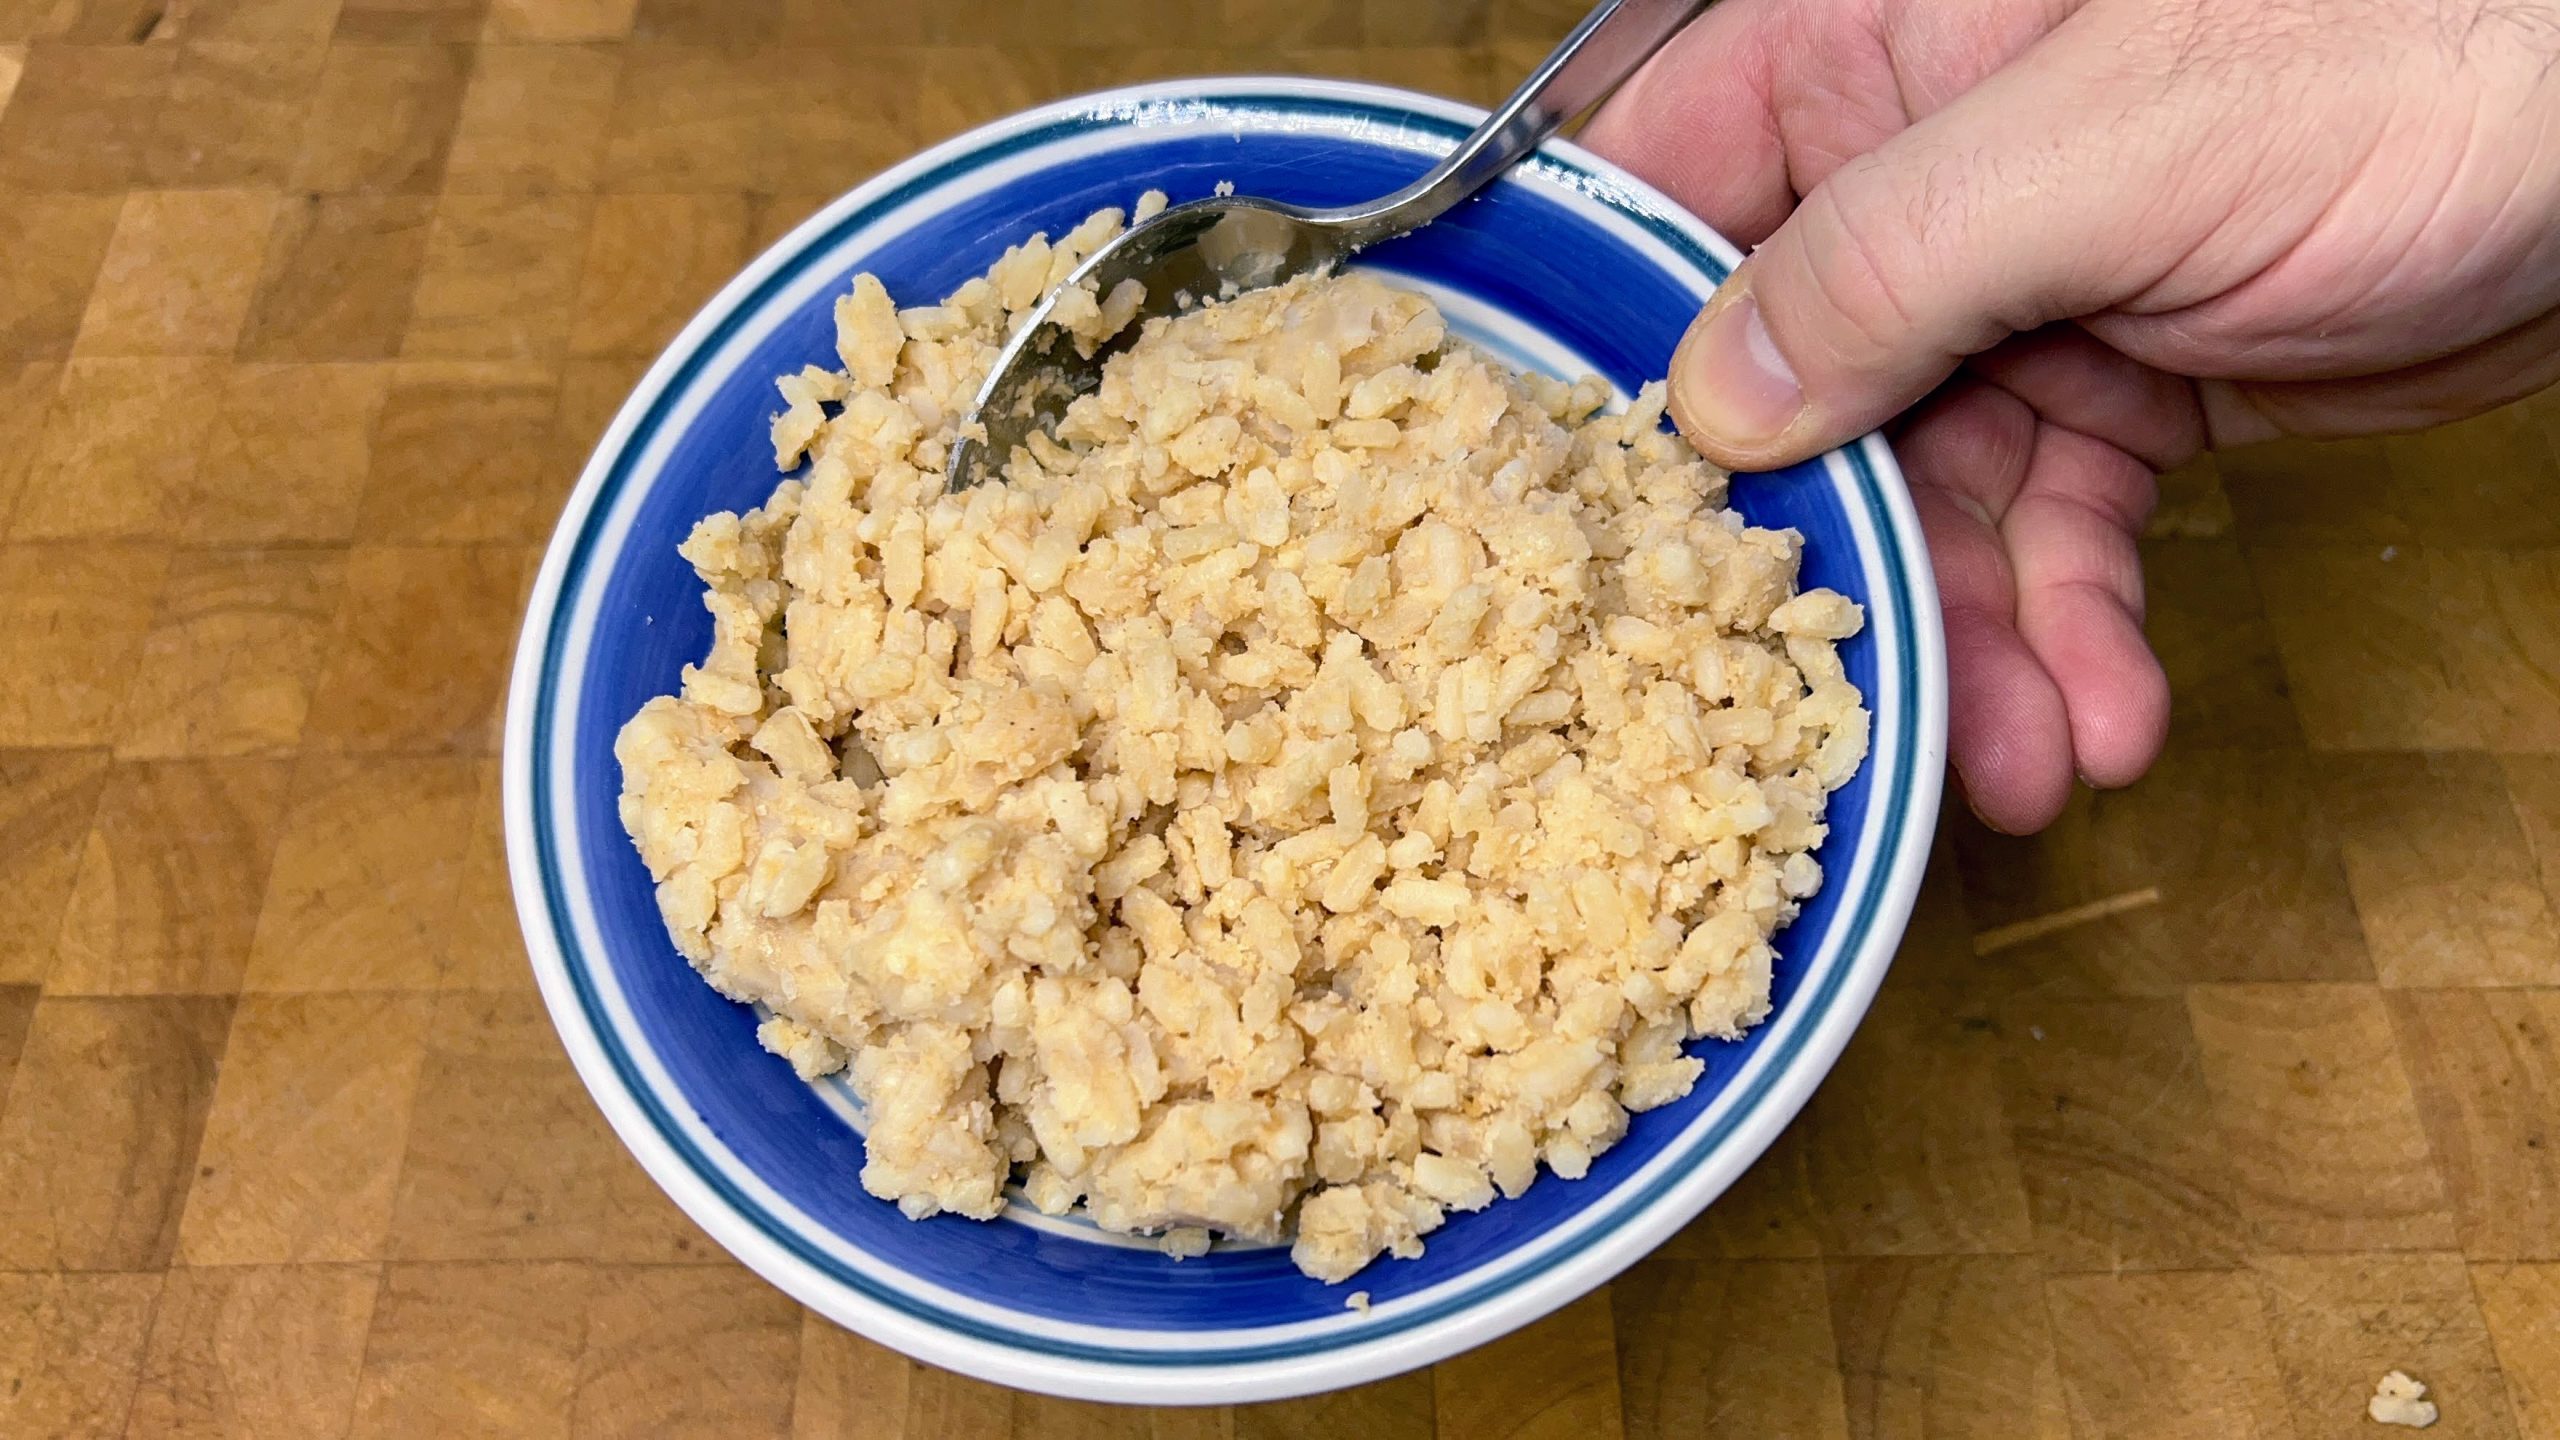 defrosted risotto in a bowl with a spoon